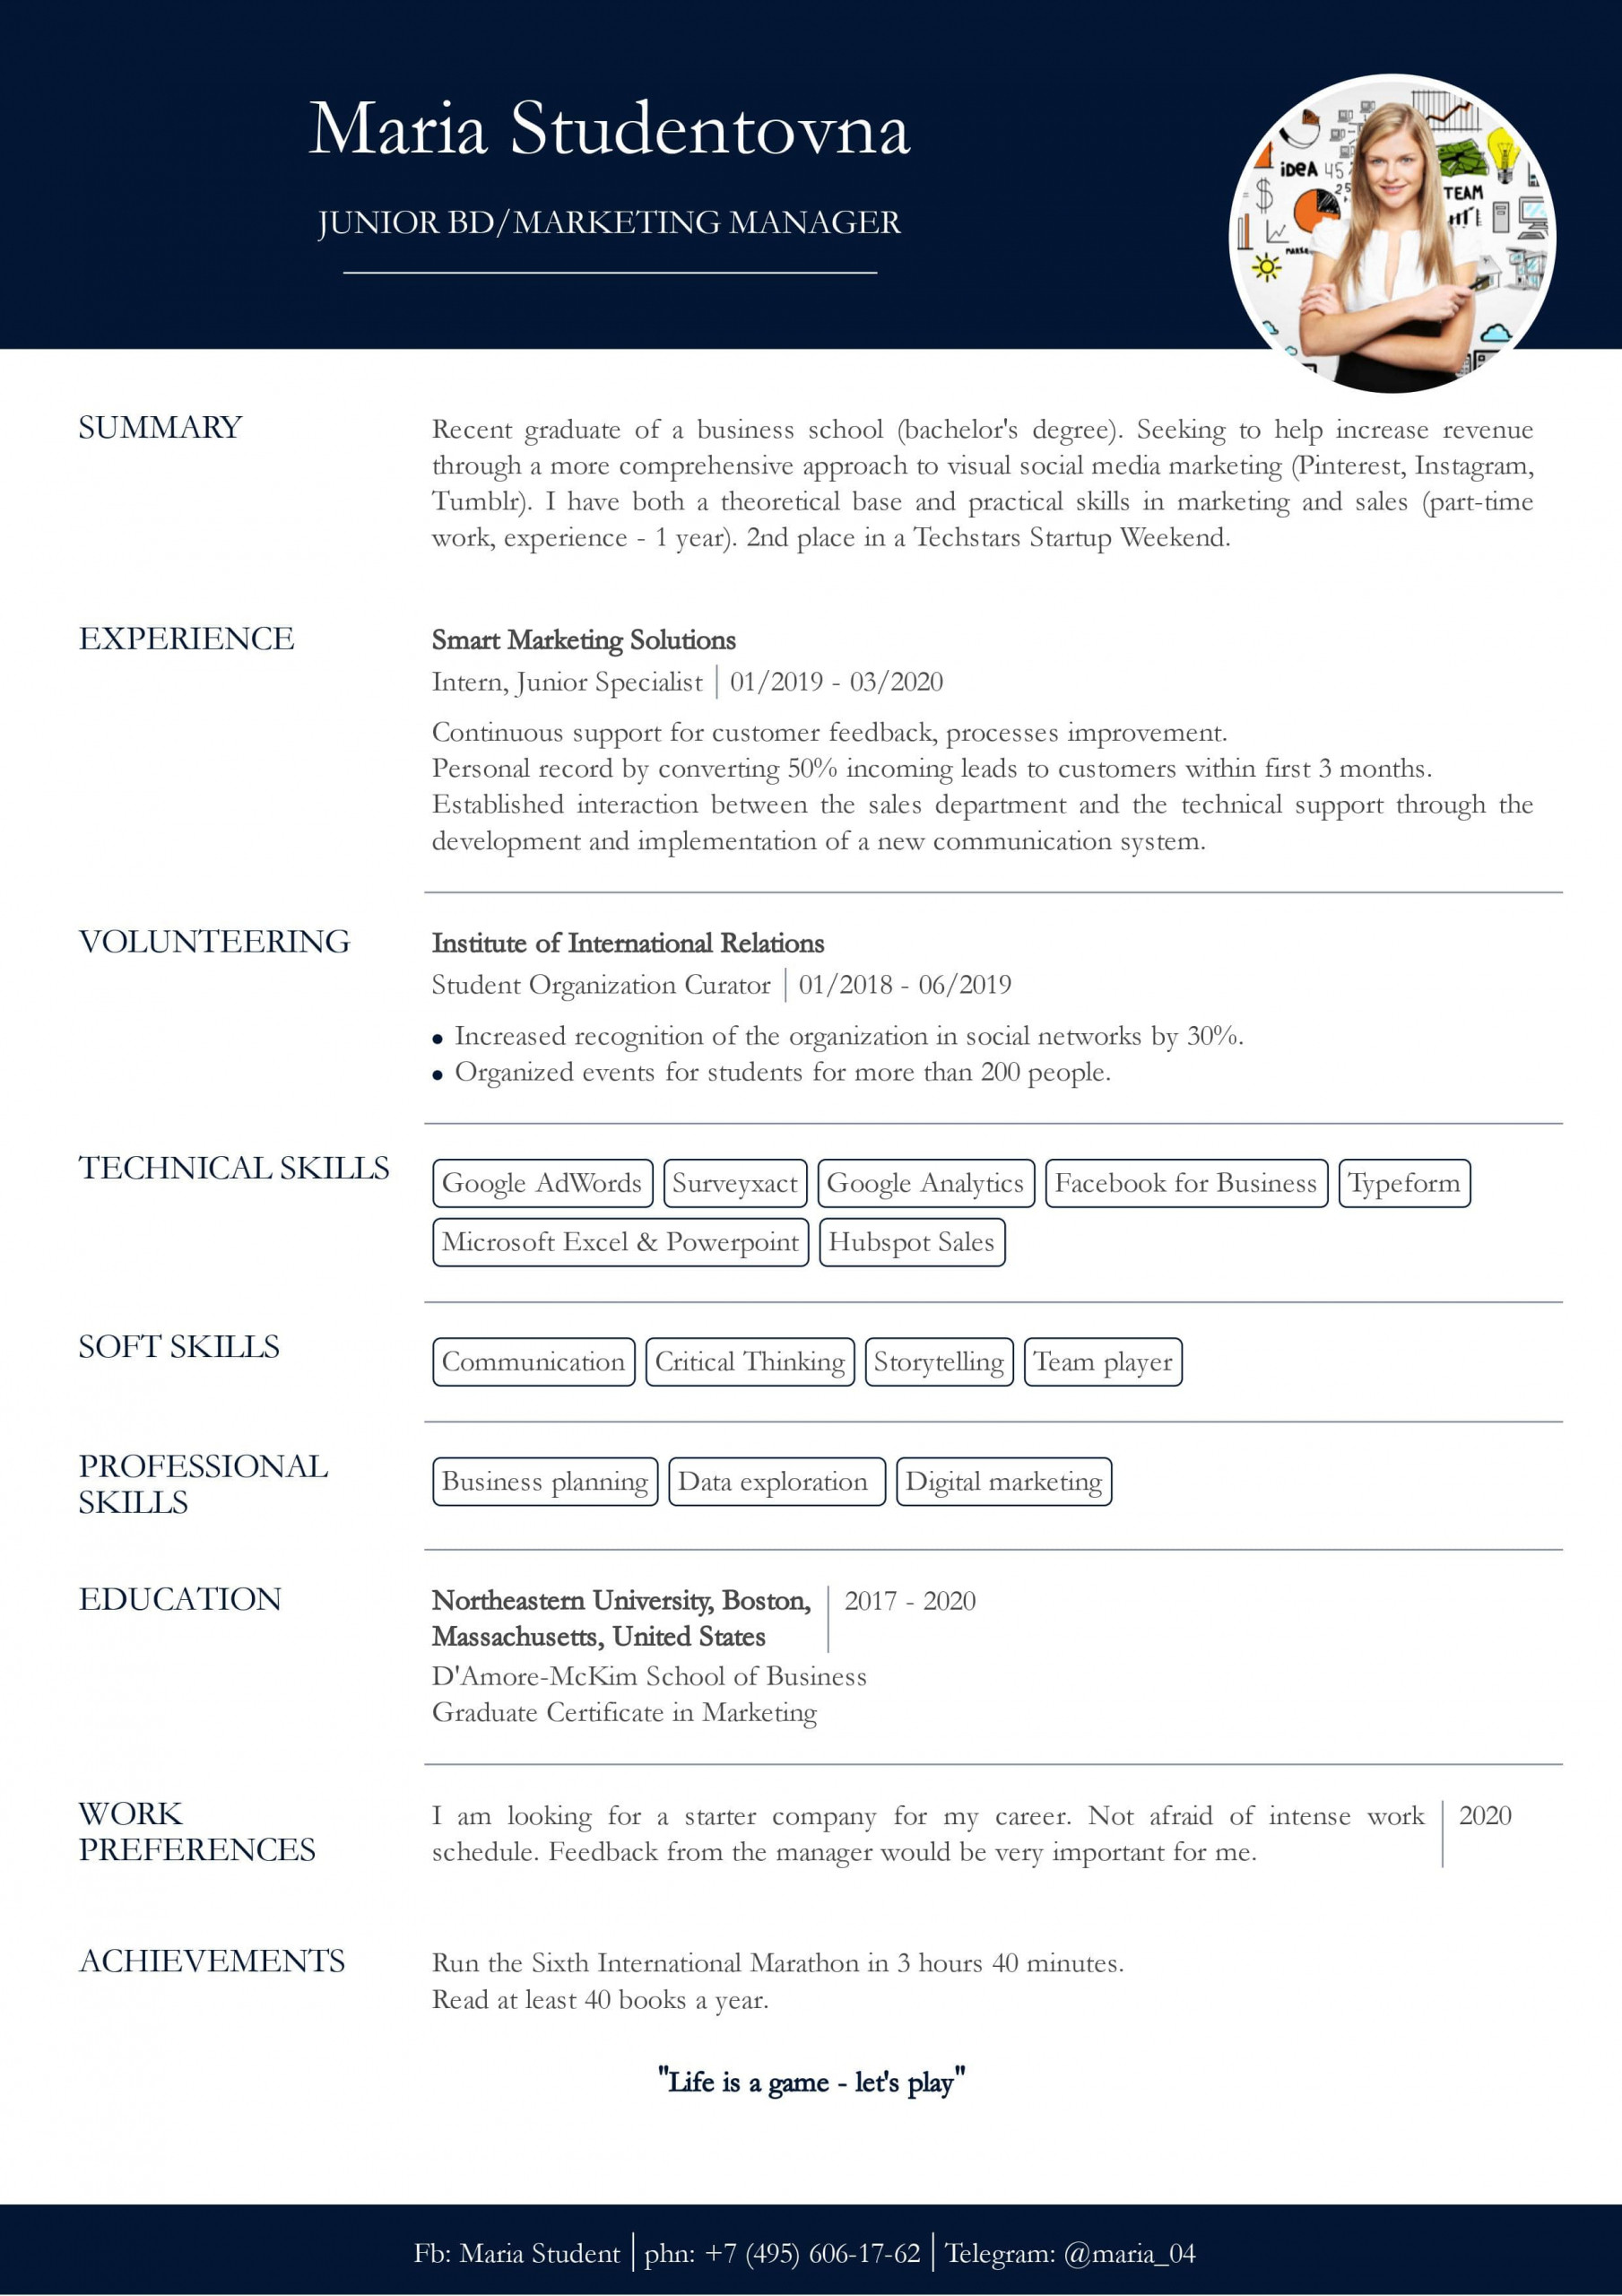 Sample Resume with No Previous Work History Resume with No Work Experience. Sample for Students. – Cv2you Blog